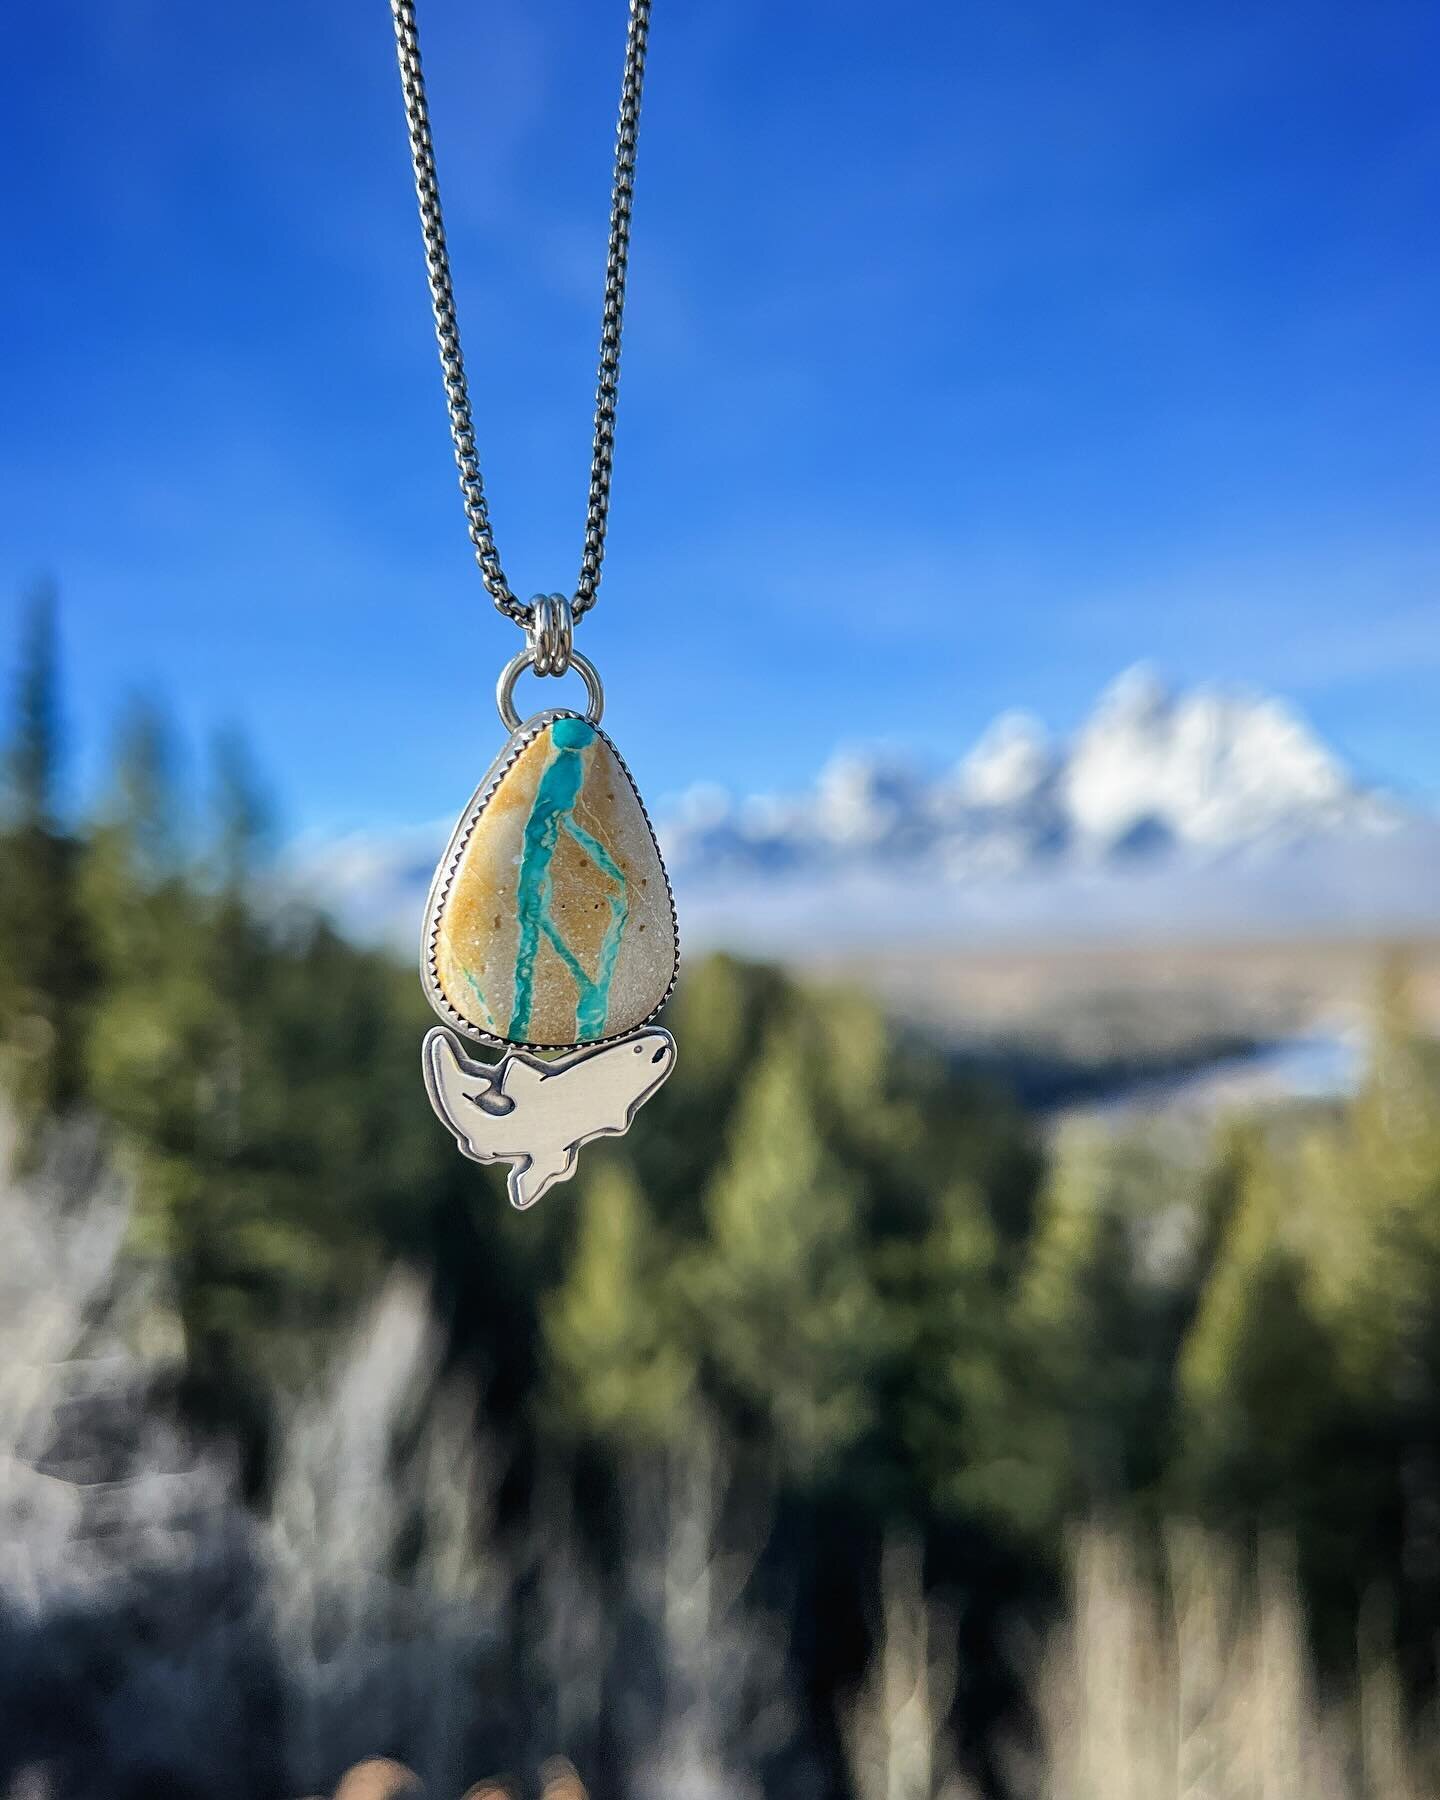 Snake River Cutthroat Trout Pendant. Made with beautiful Royston Ribbon Turquoise that mimics the Snake River. This beauty is ready for her next fly fishing badass babe to adventure on with tight lines!